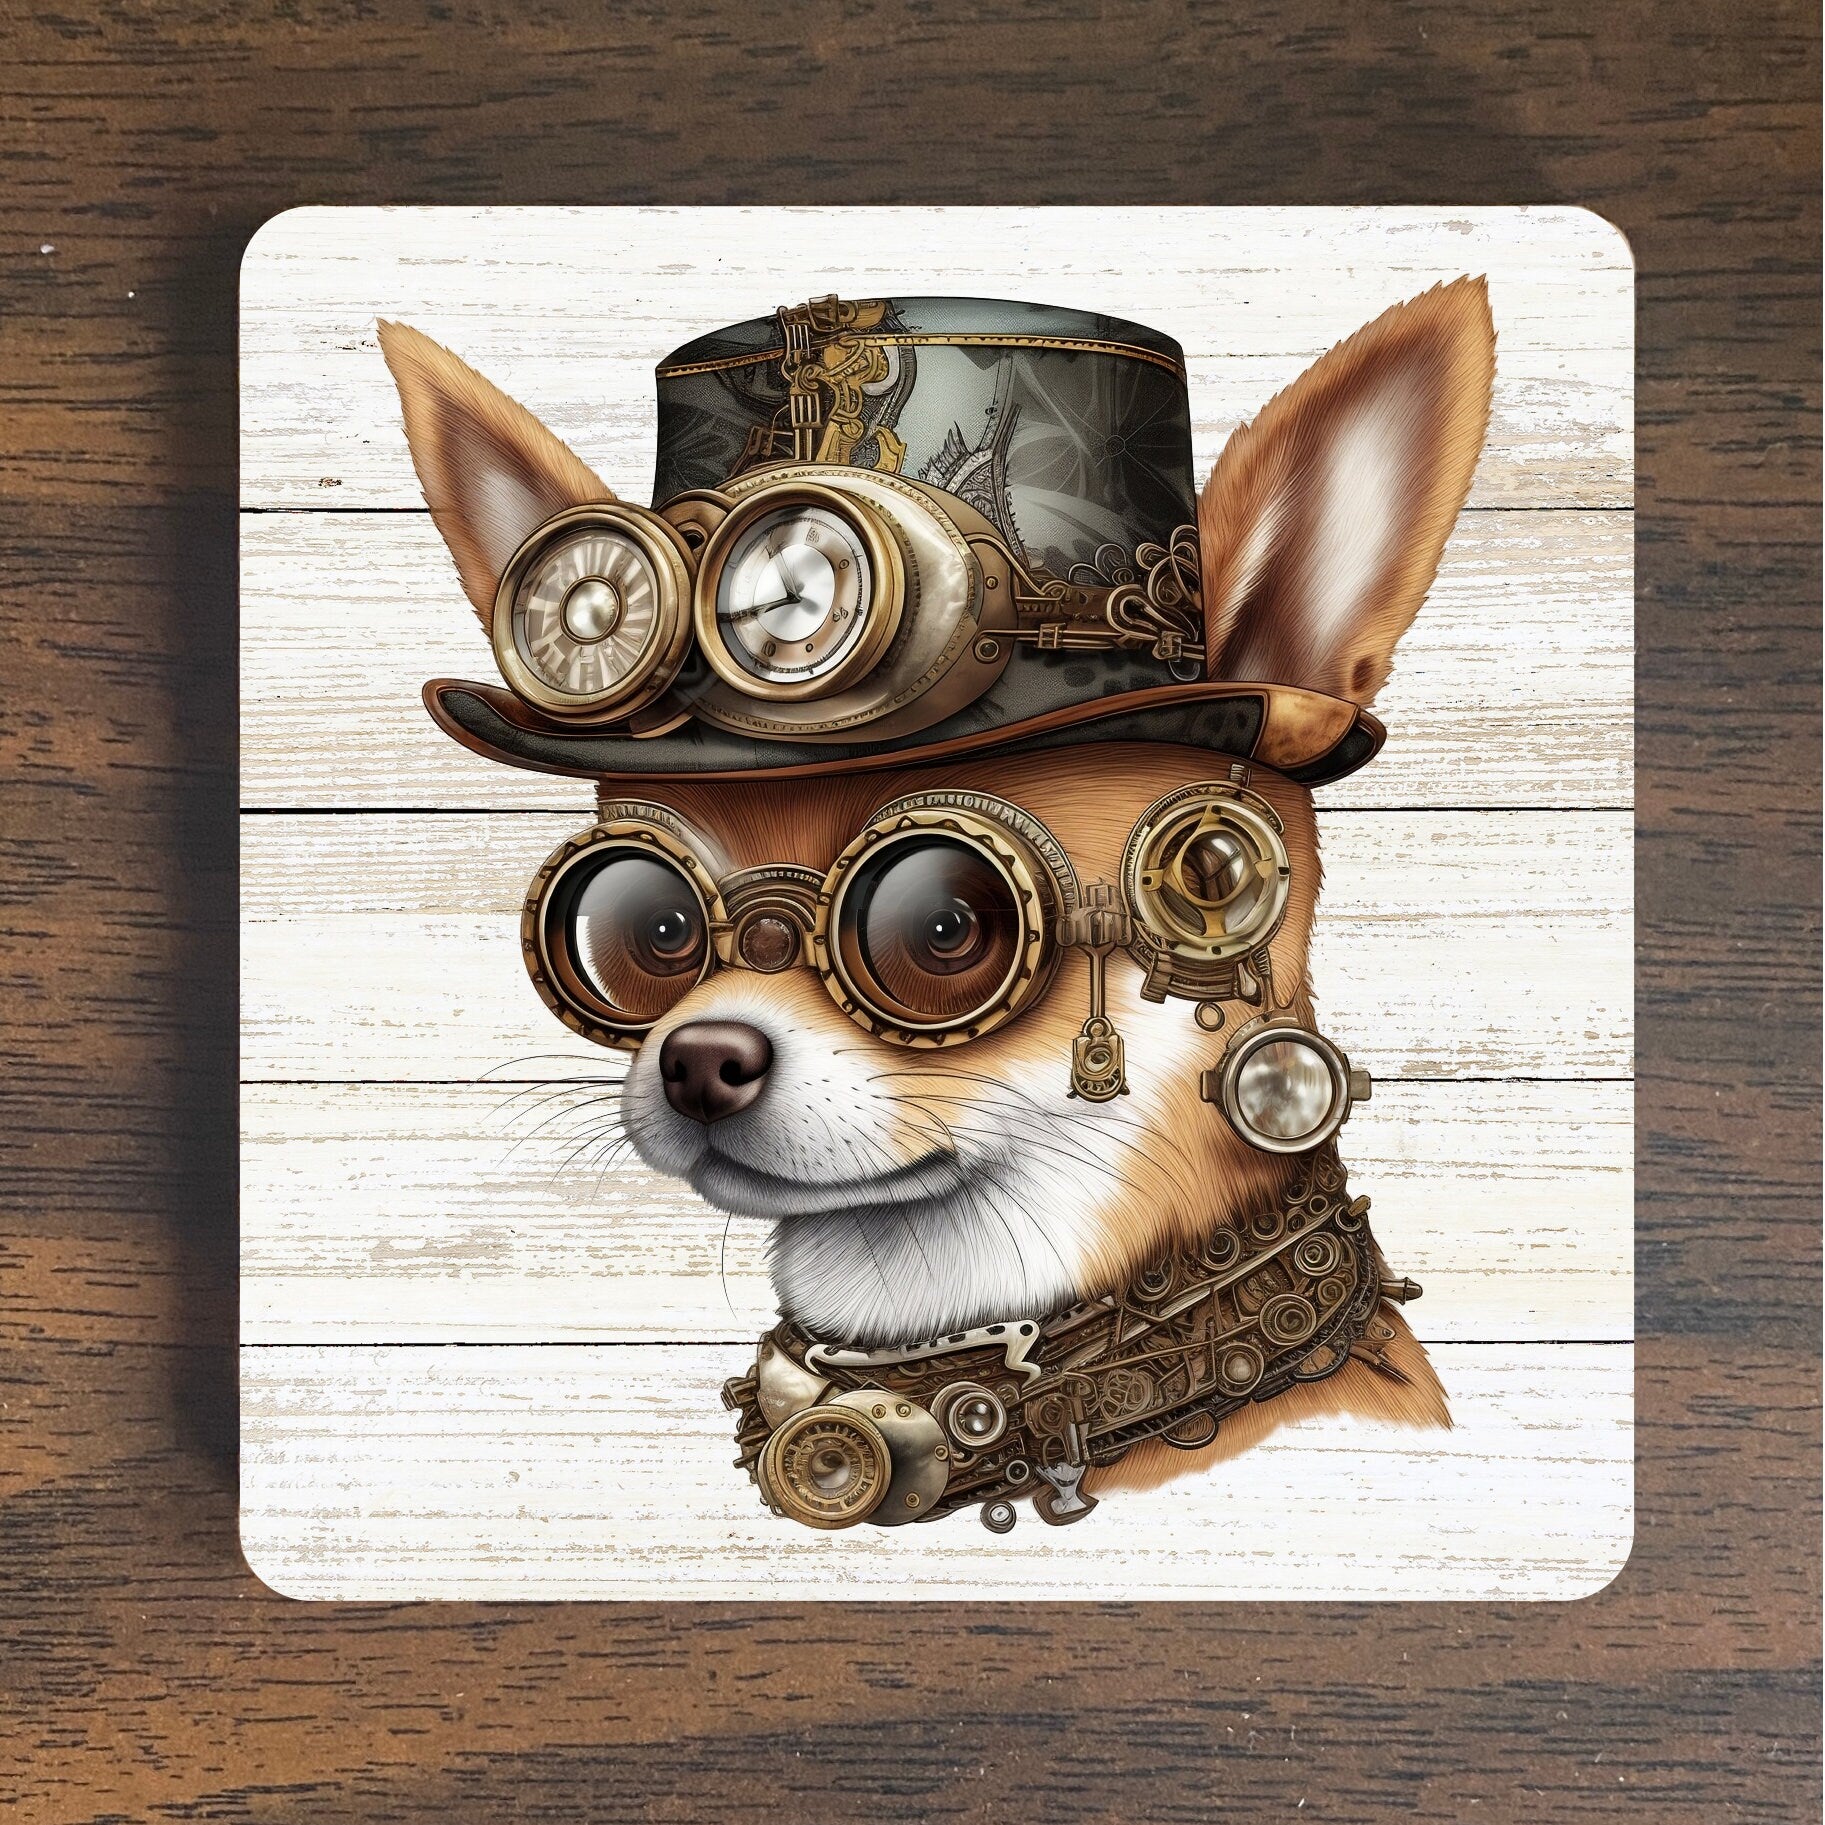 Steampunk Pup Magnet - Charming Chihuahua with a Mechanical Twist - Chihuahua Magnet - Steampunk Magnet - Chihuahua Steampunk Magnet